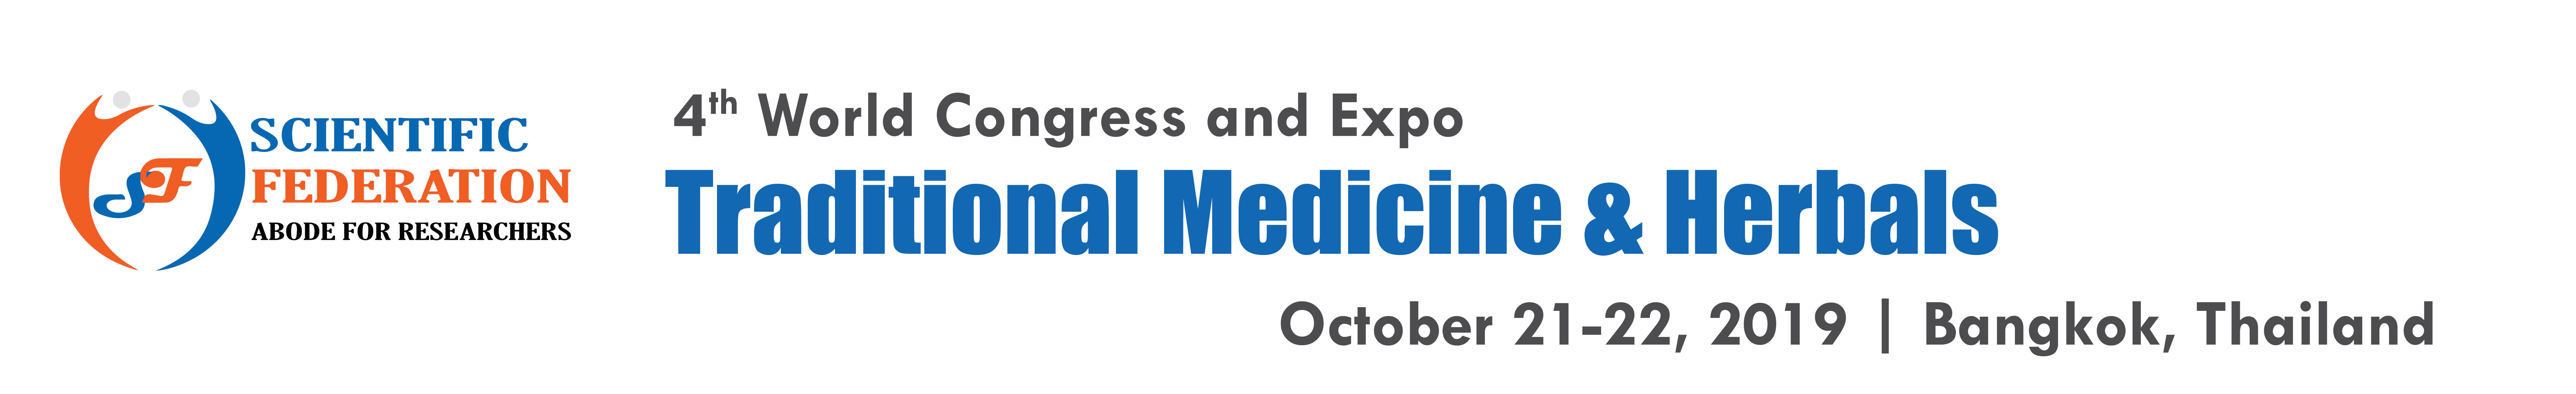 4th World Congress and Expo Traditional Medicine & Herbals 